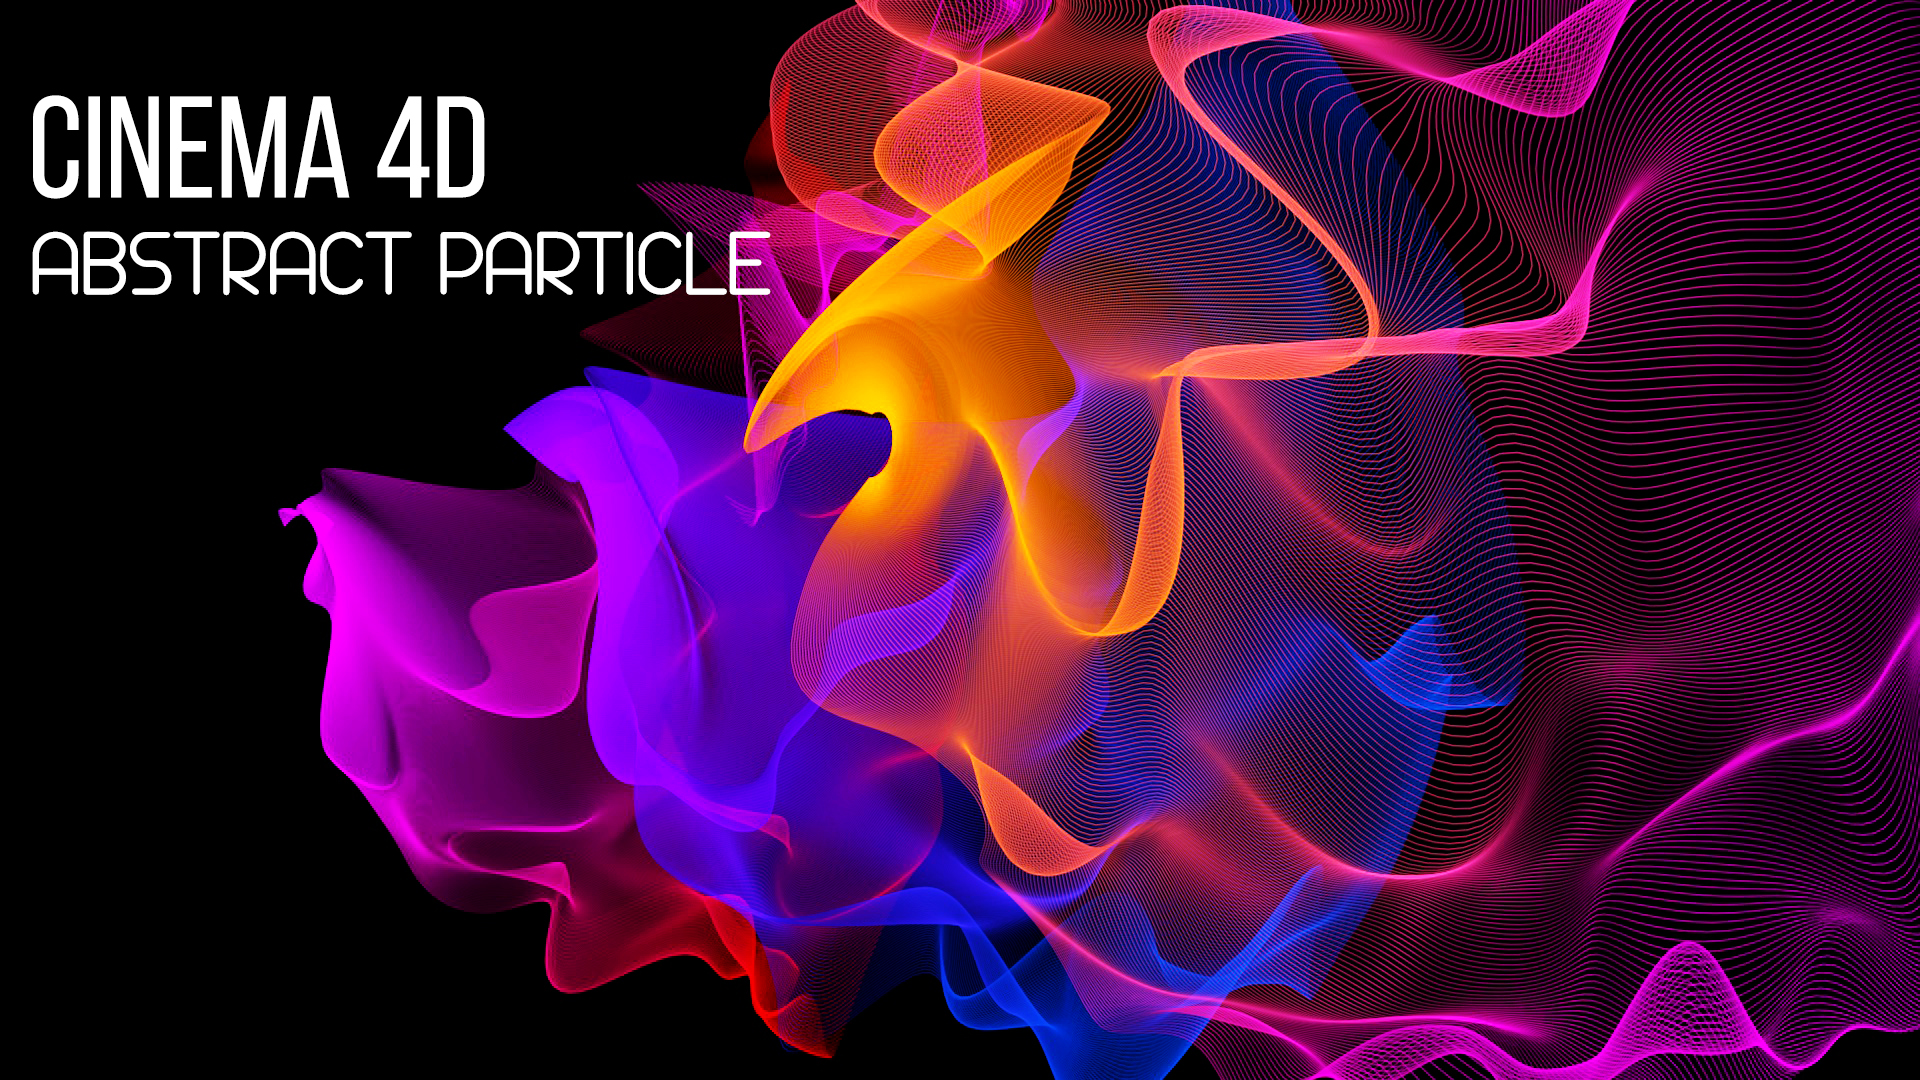 Abstract Particle Animation – Cinema 4D Tutorial